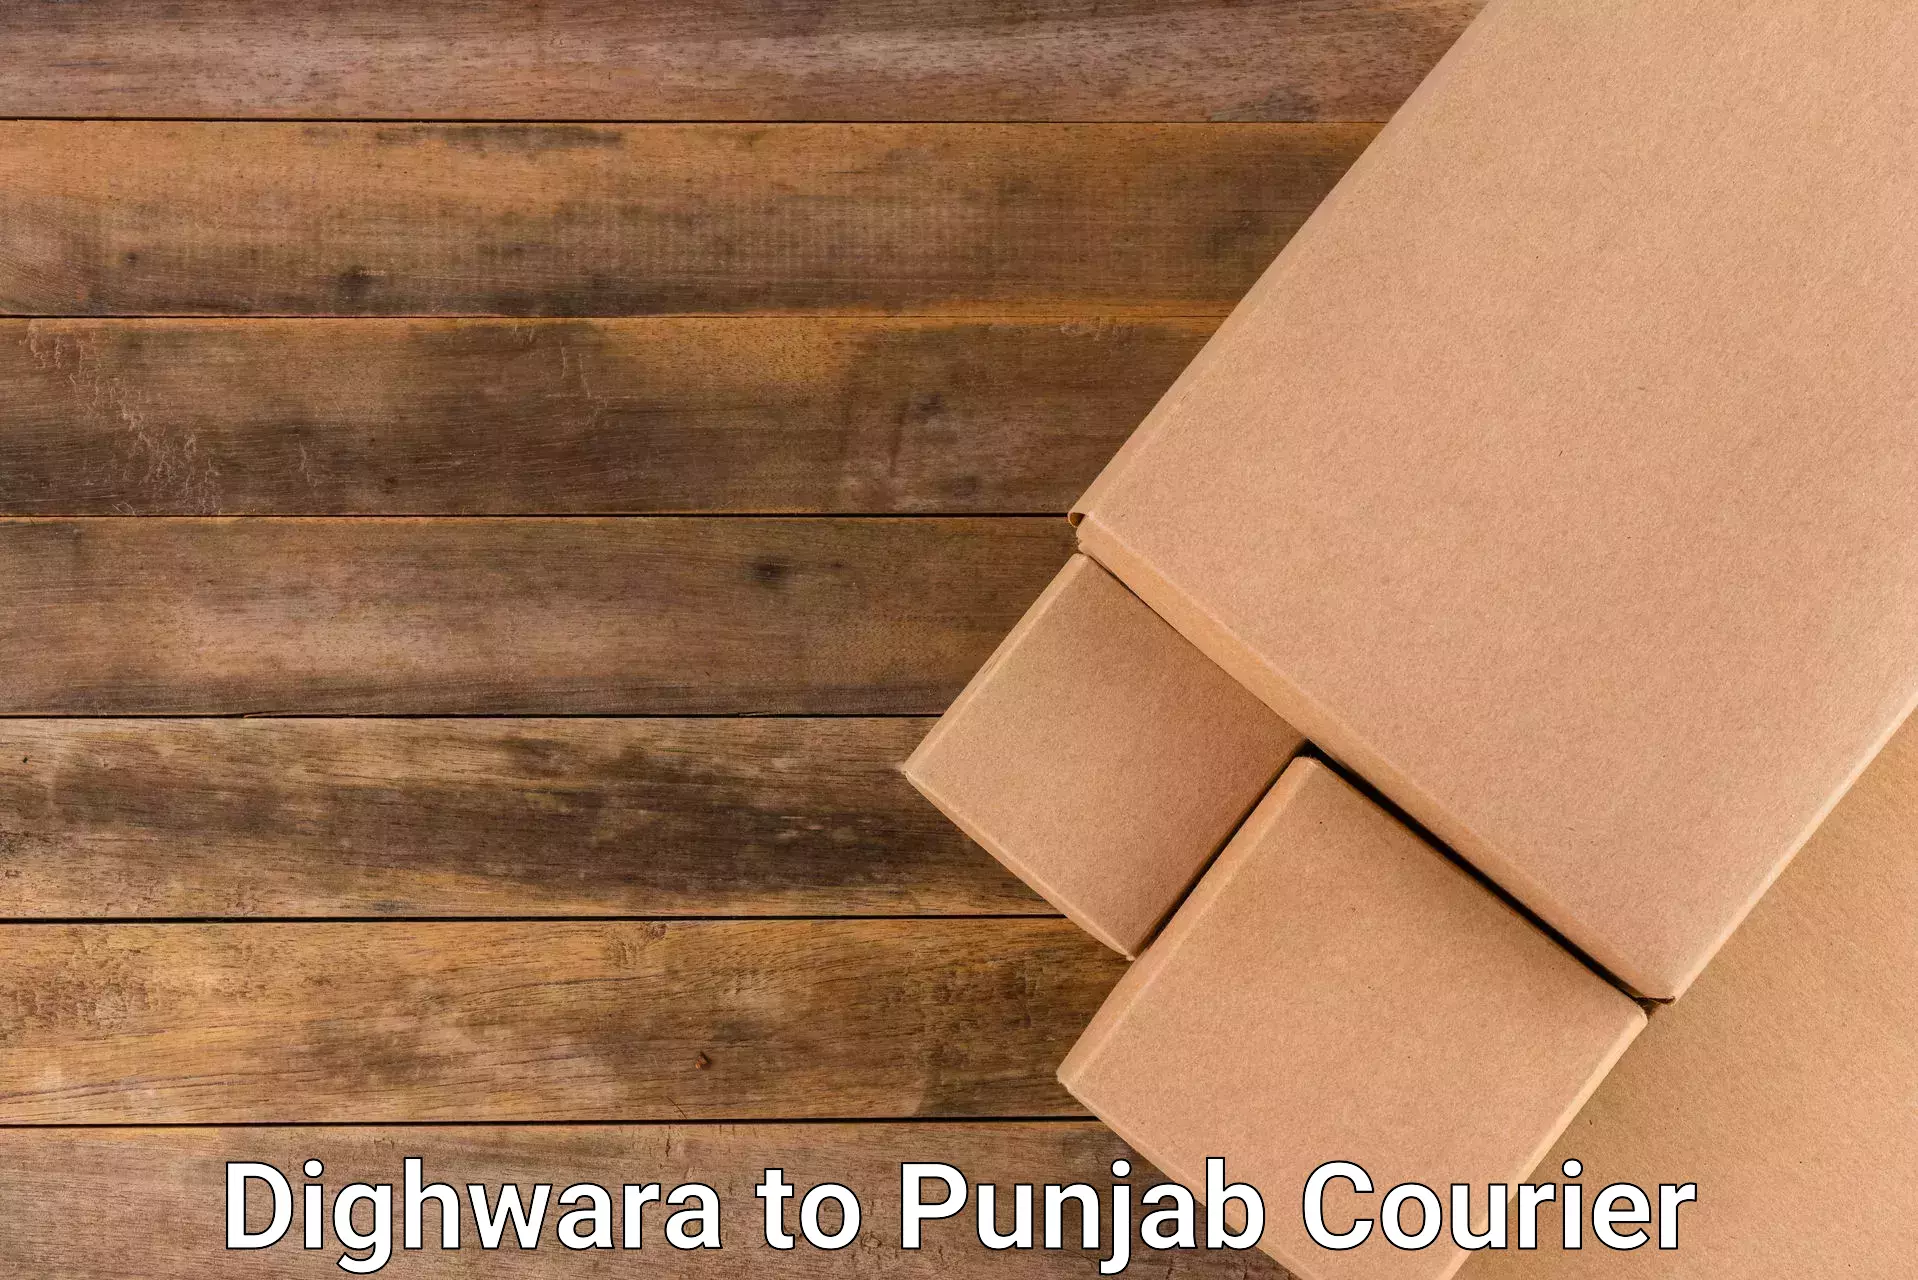 Medical delivery services Dighwara to Fatehgarh Sahib